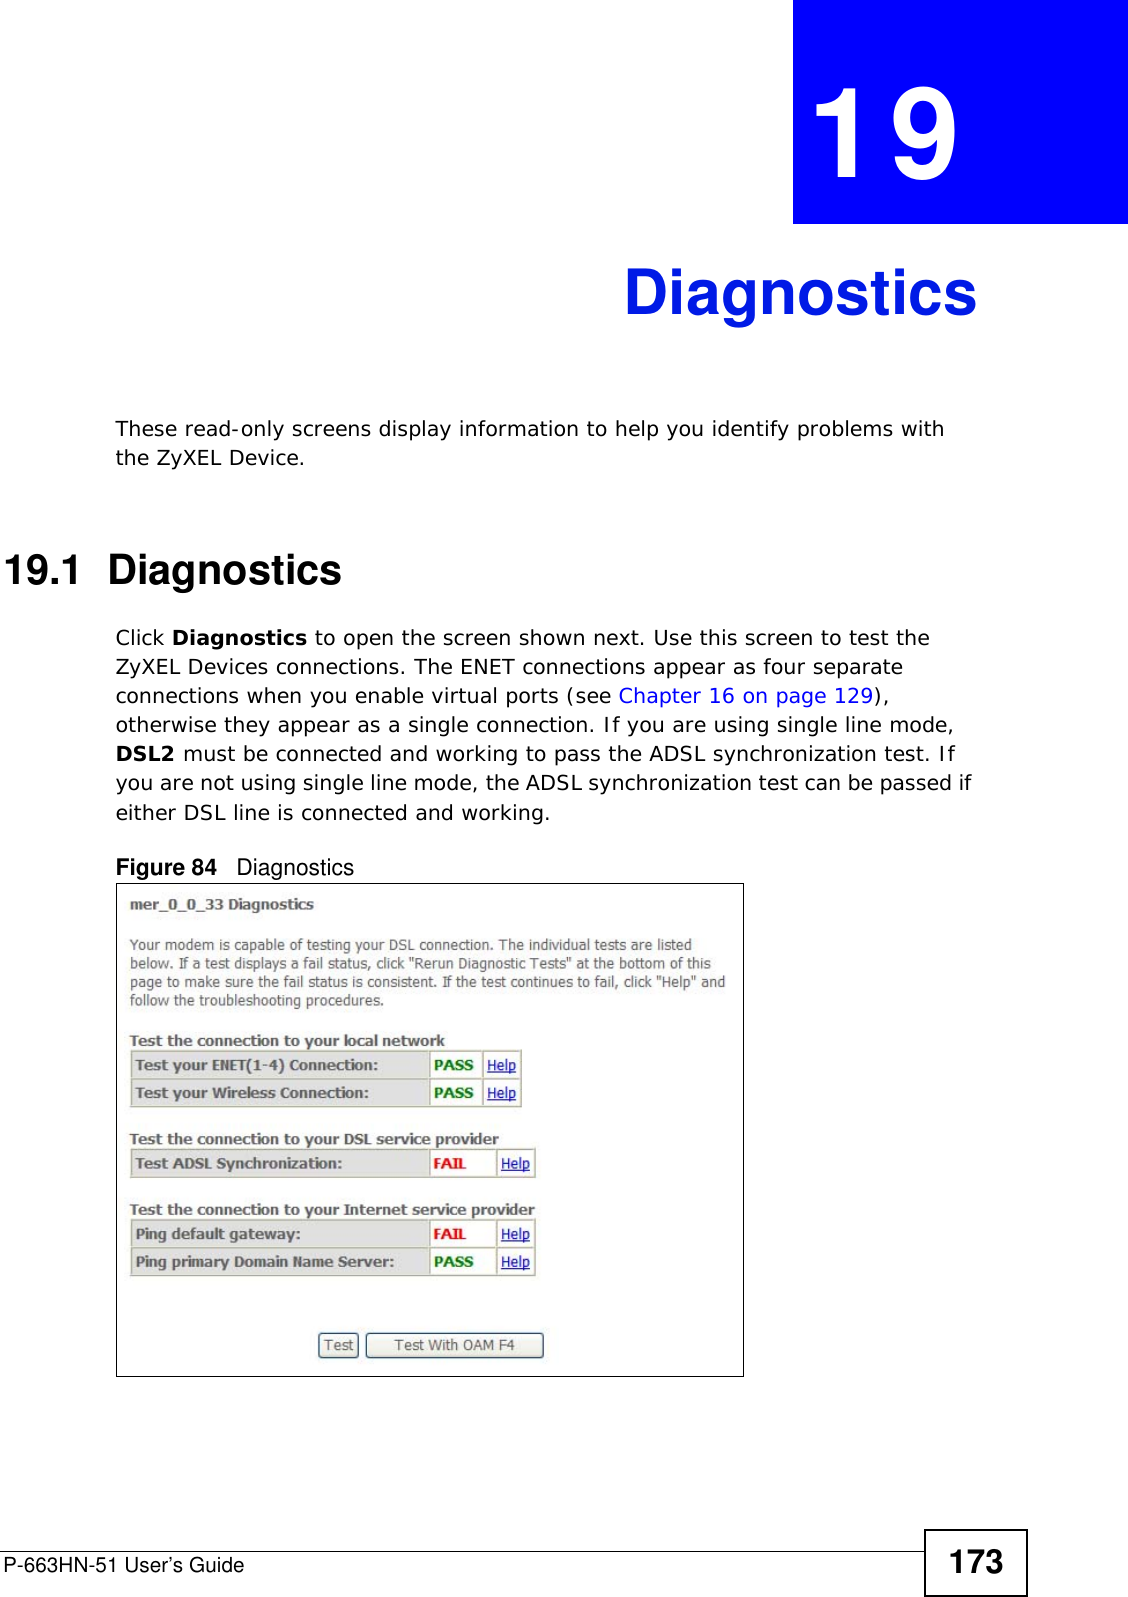 P-663HN-51 User’s Guide 173CHAPTER  19 DiagnosticsThese read-only screens display information to help you identify problems with the ZyXEL Device.19.1  Diagnostics     Click Diagnostics to open the screen shown next. Use this screen to test the ZyXEL Devices connections. The ENET connections appear as four separate connections when you enable virtual ports (see Chapter 16 on page 129), otherwise they appear as a single connection. If you are using single line mode, DSL2 must be connected and working to pass the ADSL synchronization test. If you are not using single line mode, the ADSL synchronization test can be passed if either DSL line is connected and working.Figure 84   Diagnostics